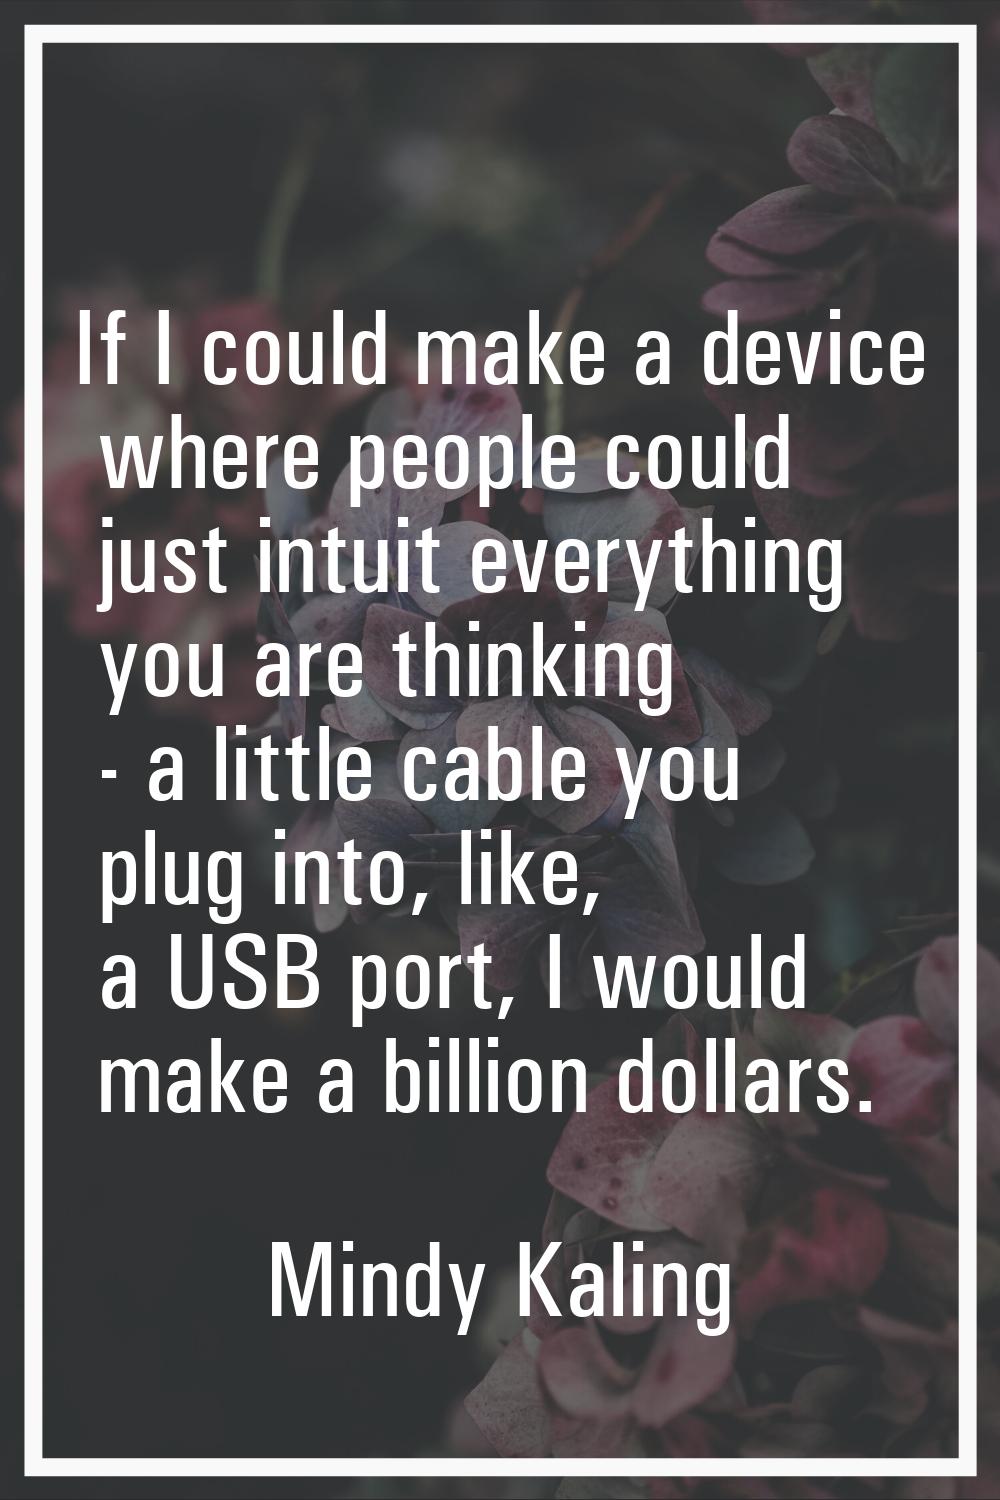 If I could make a device where people could just intuit everything you are thinking - a little cabl